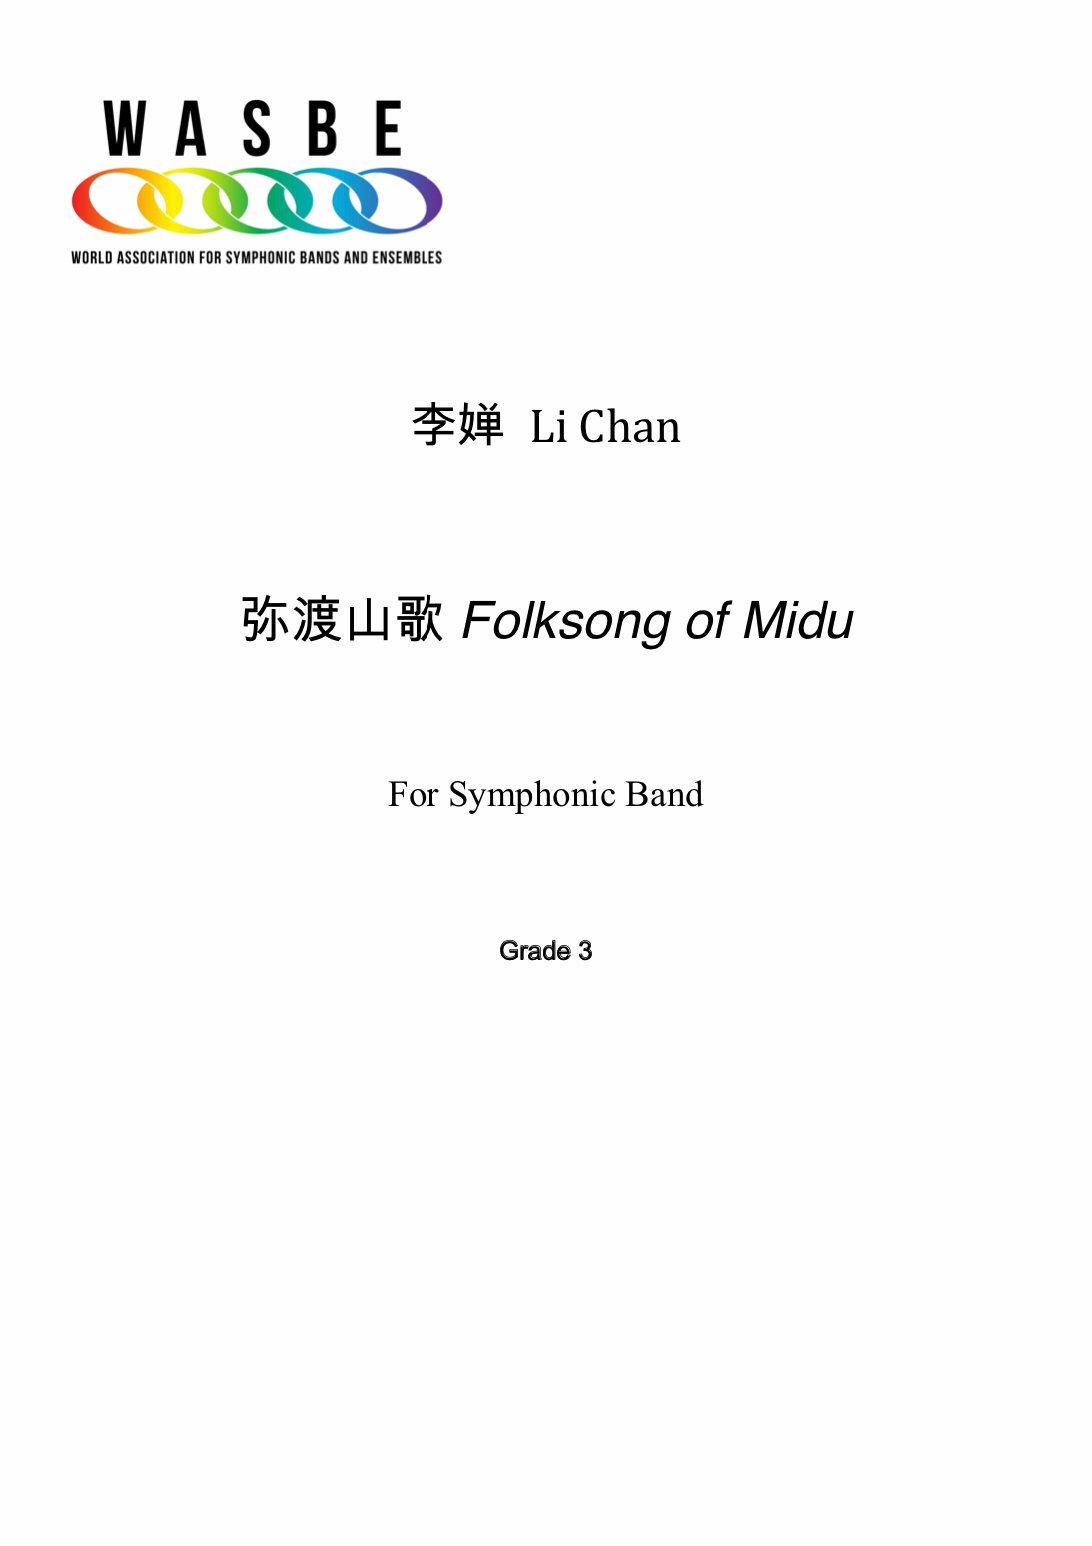 Folksong Of Midu by Li Chan